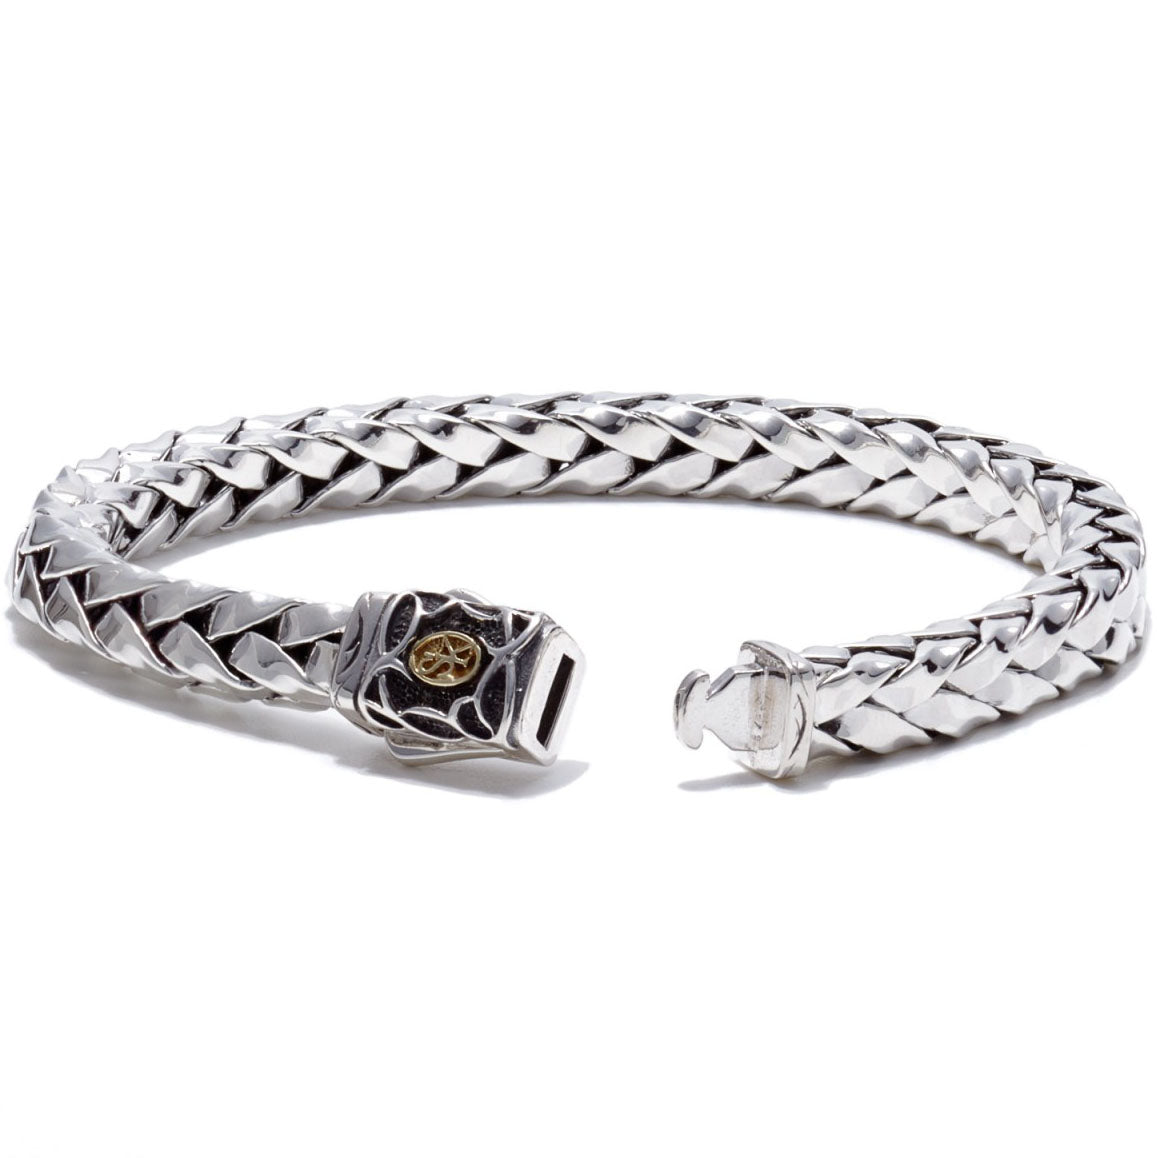 Scott Kay Equestrian Sterling Silver Braided Bracelet, 18K Gold Accent, 7mm wide and 8.5 inches long